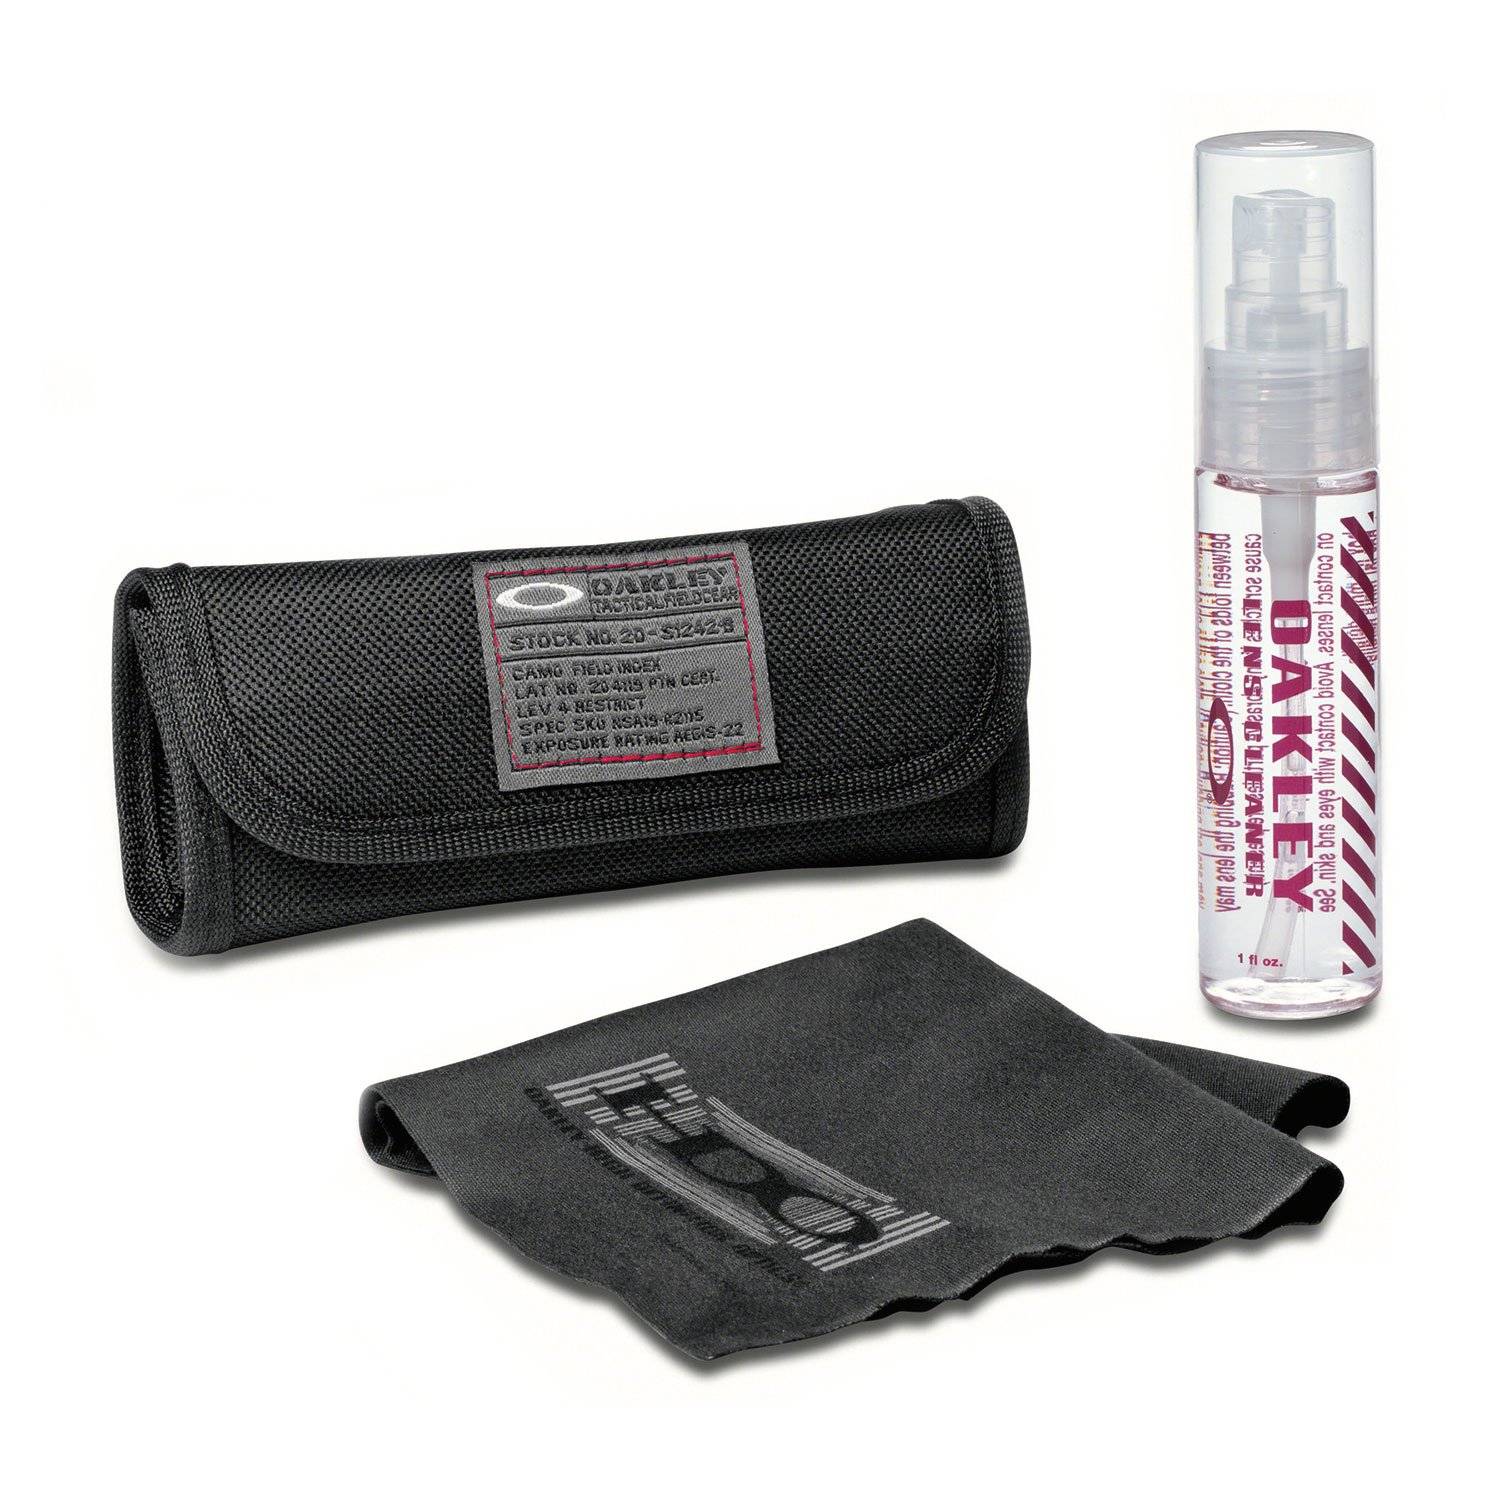 Oakley Lens Cleaning and Care Kit